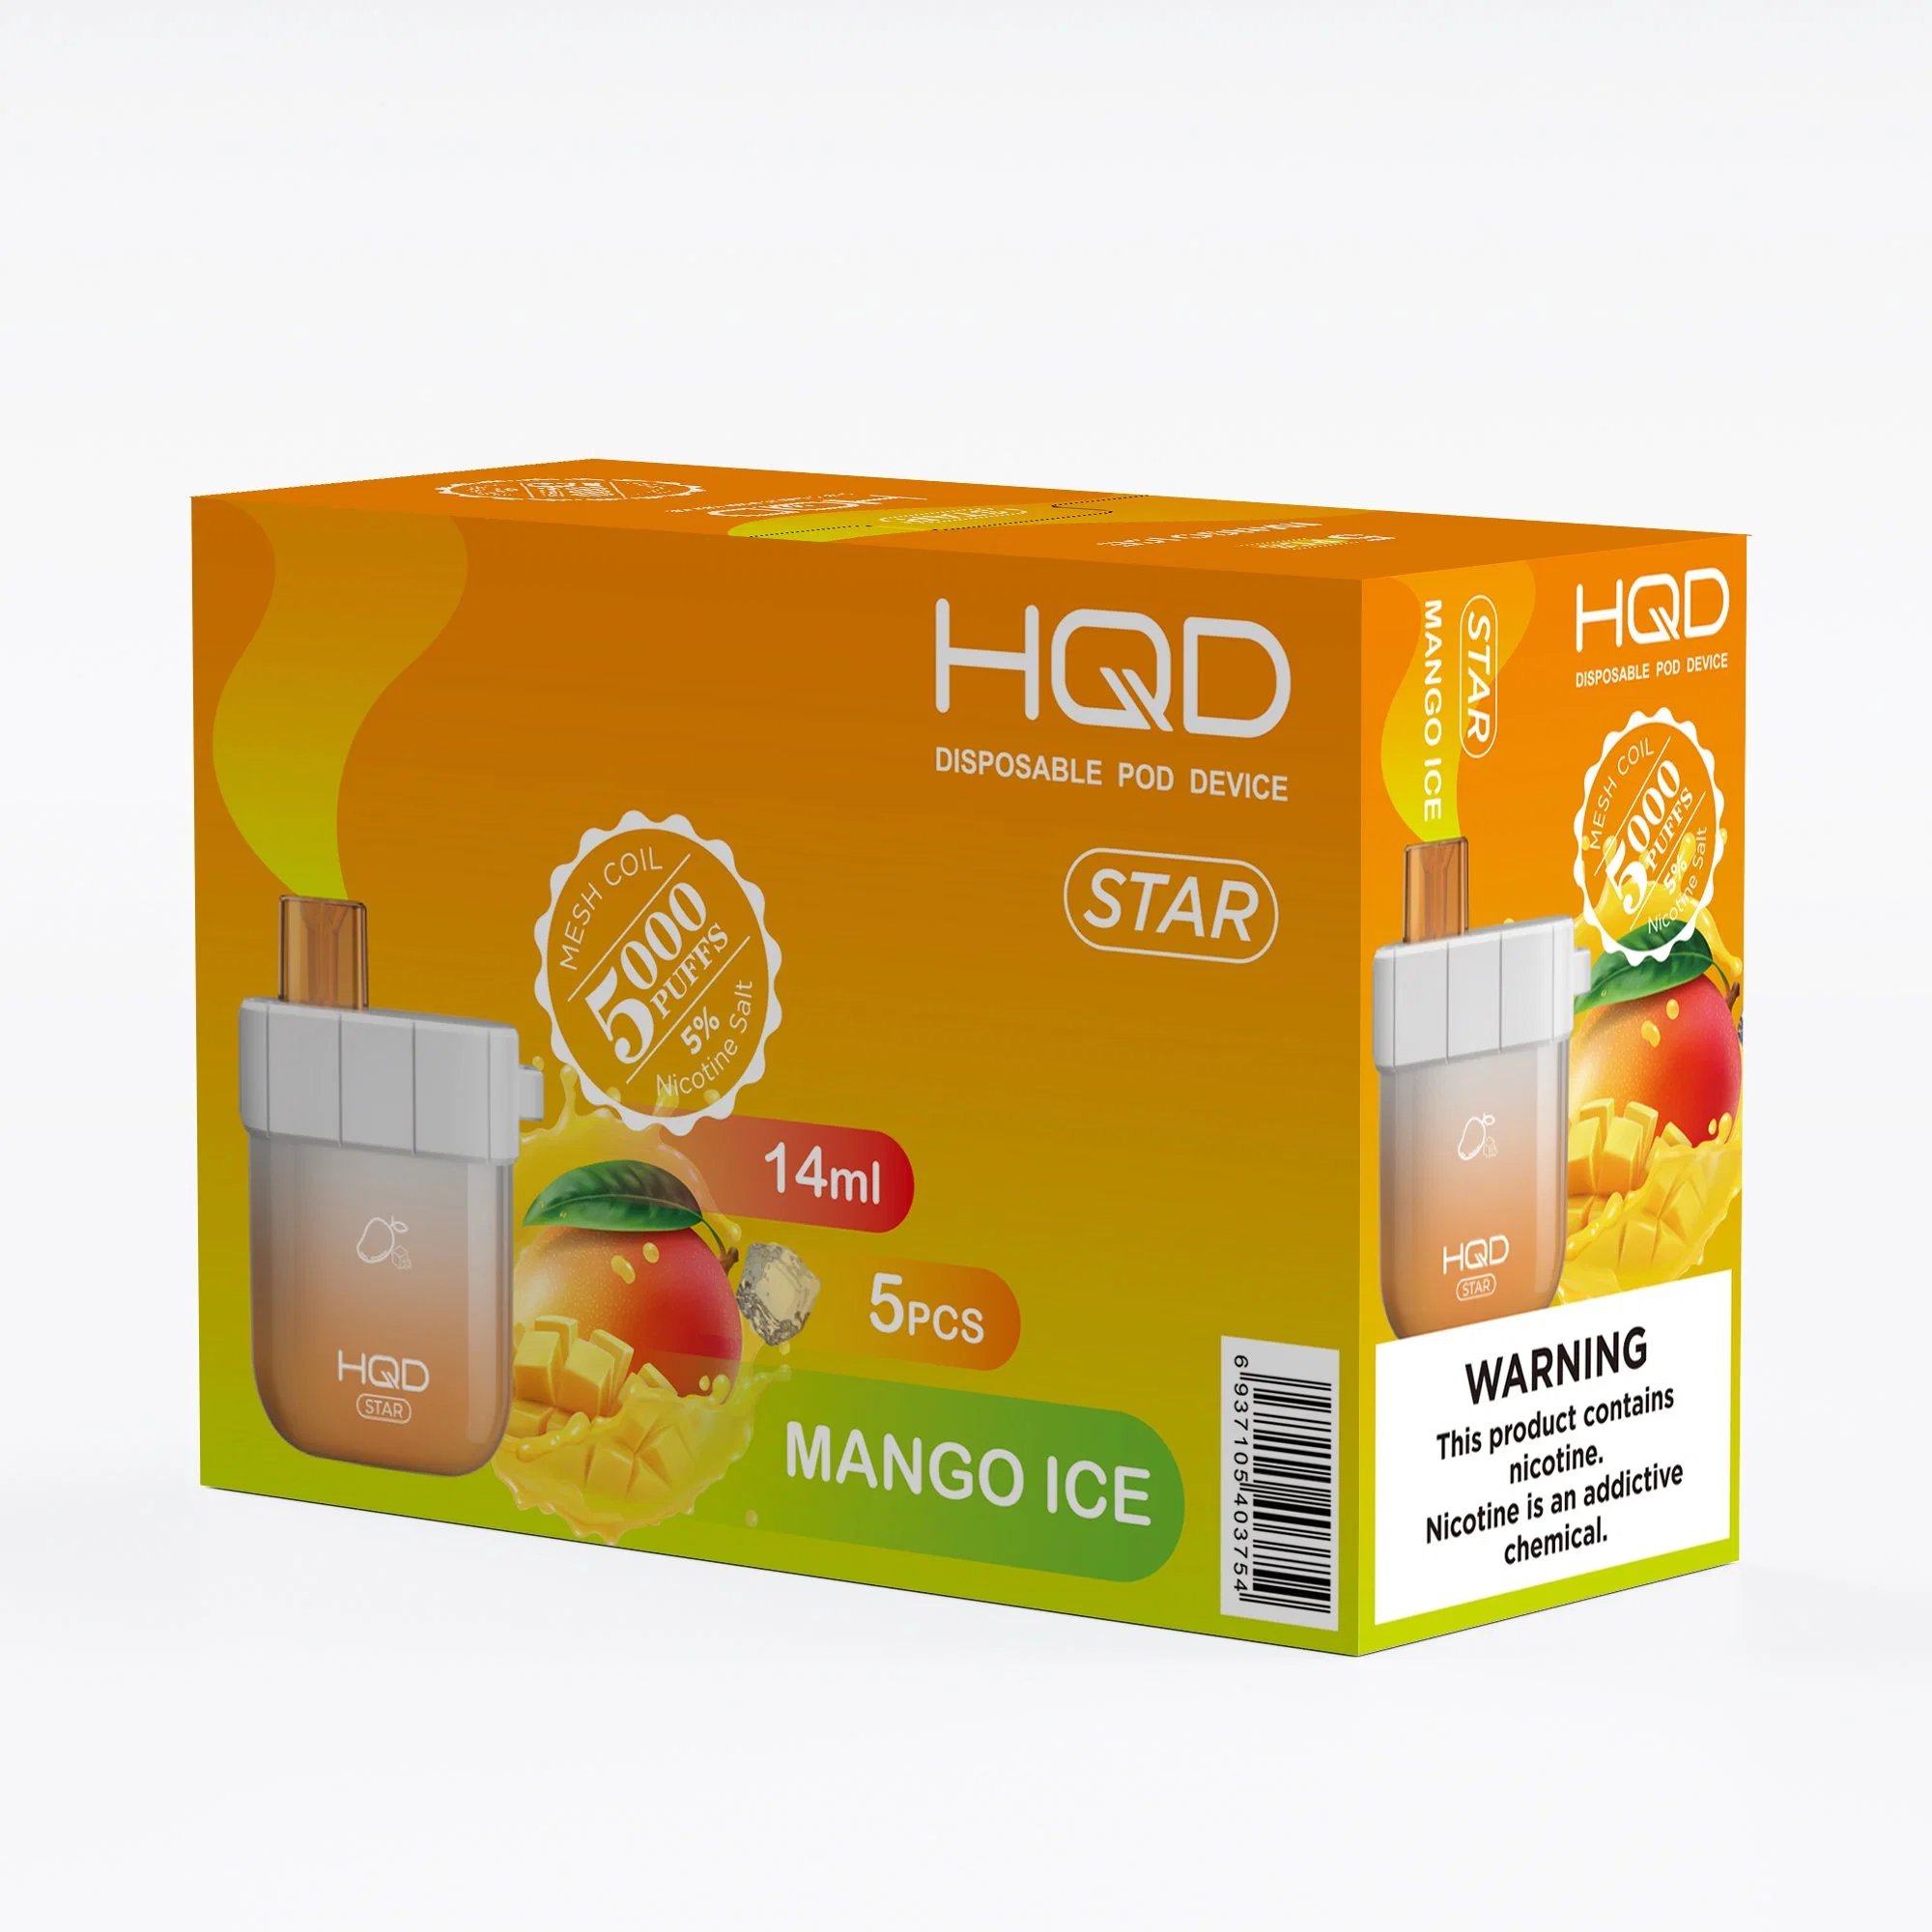 Hqd Original 5000 Puffs Disposable/Chargeable Vape Ecigarette Supplier Manufacturer From China Star